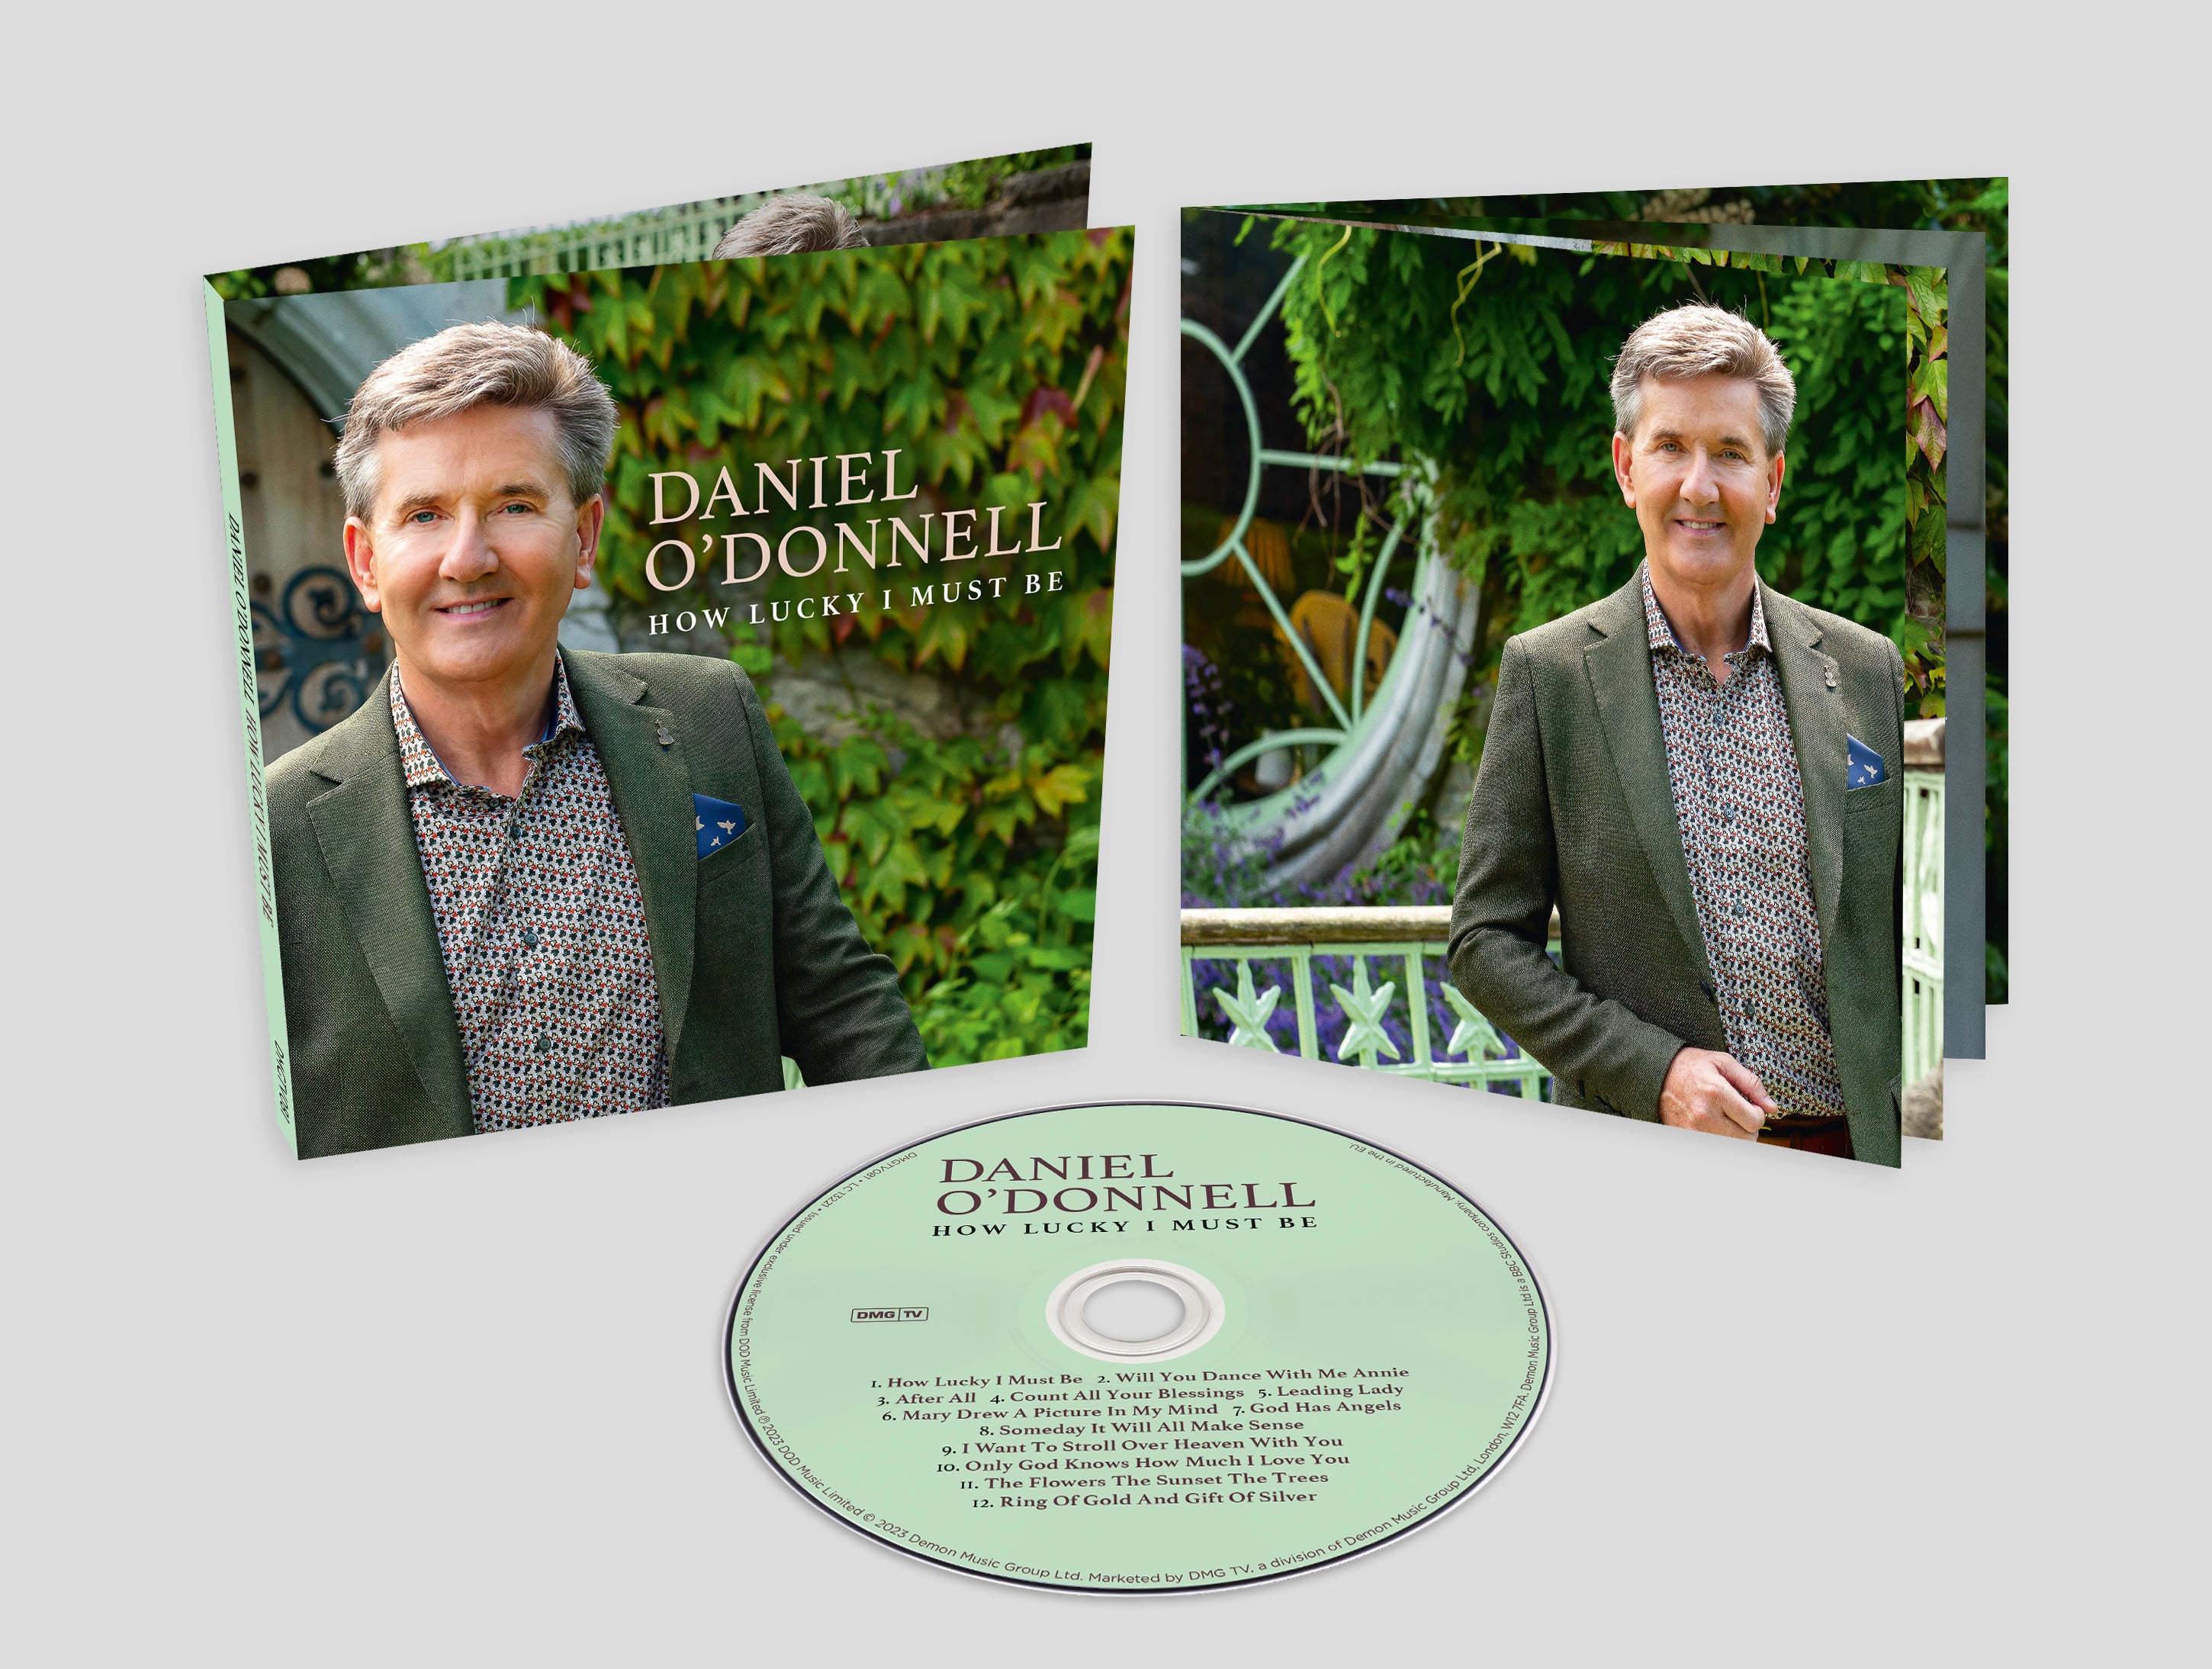 DANIEL O'DONNELL - HOW LUCKY I MUST BE